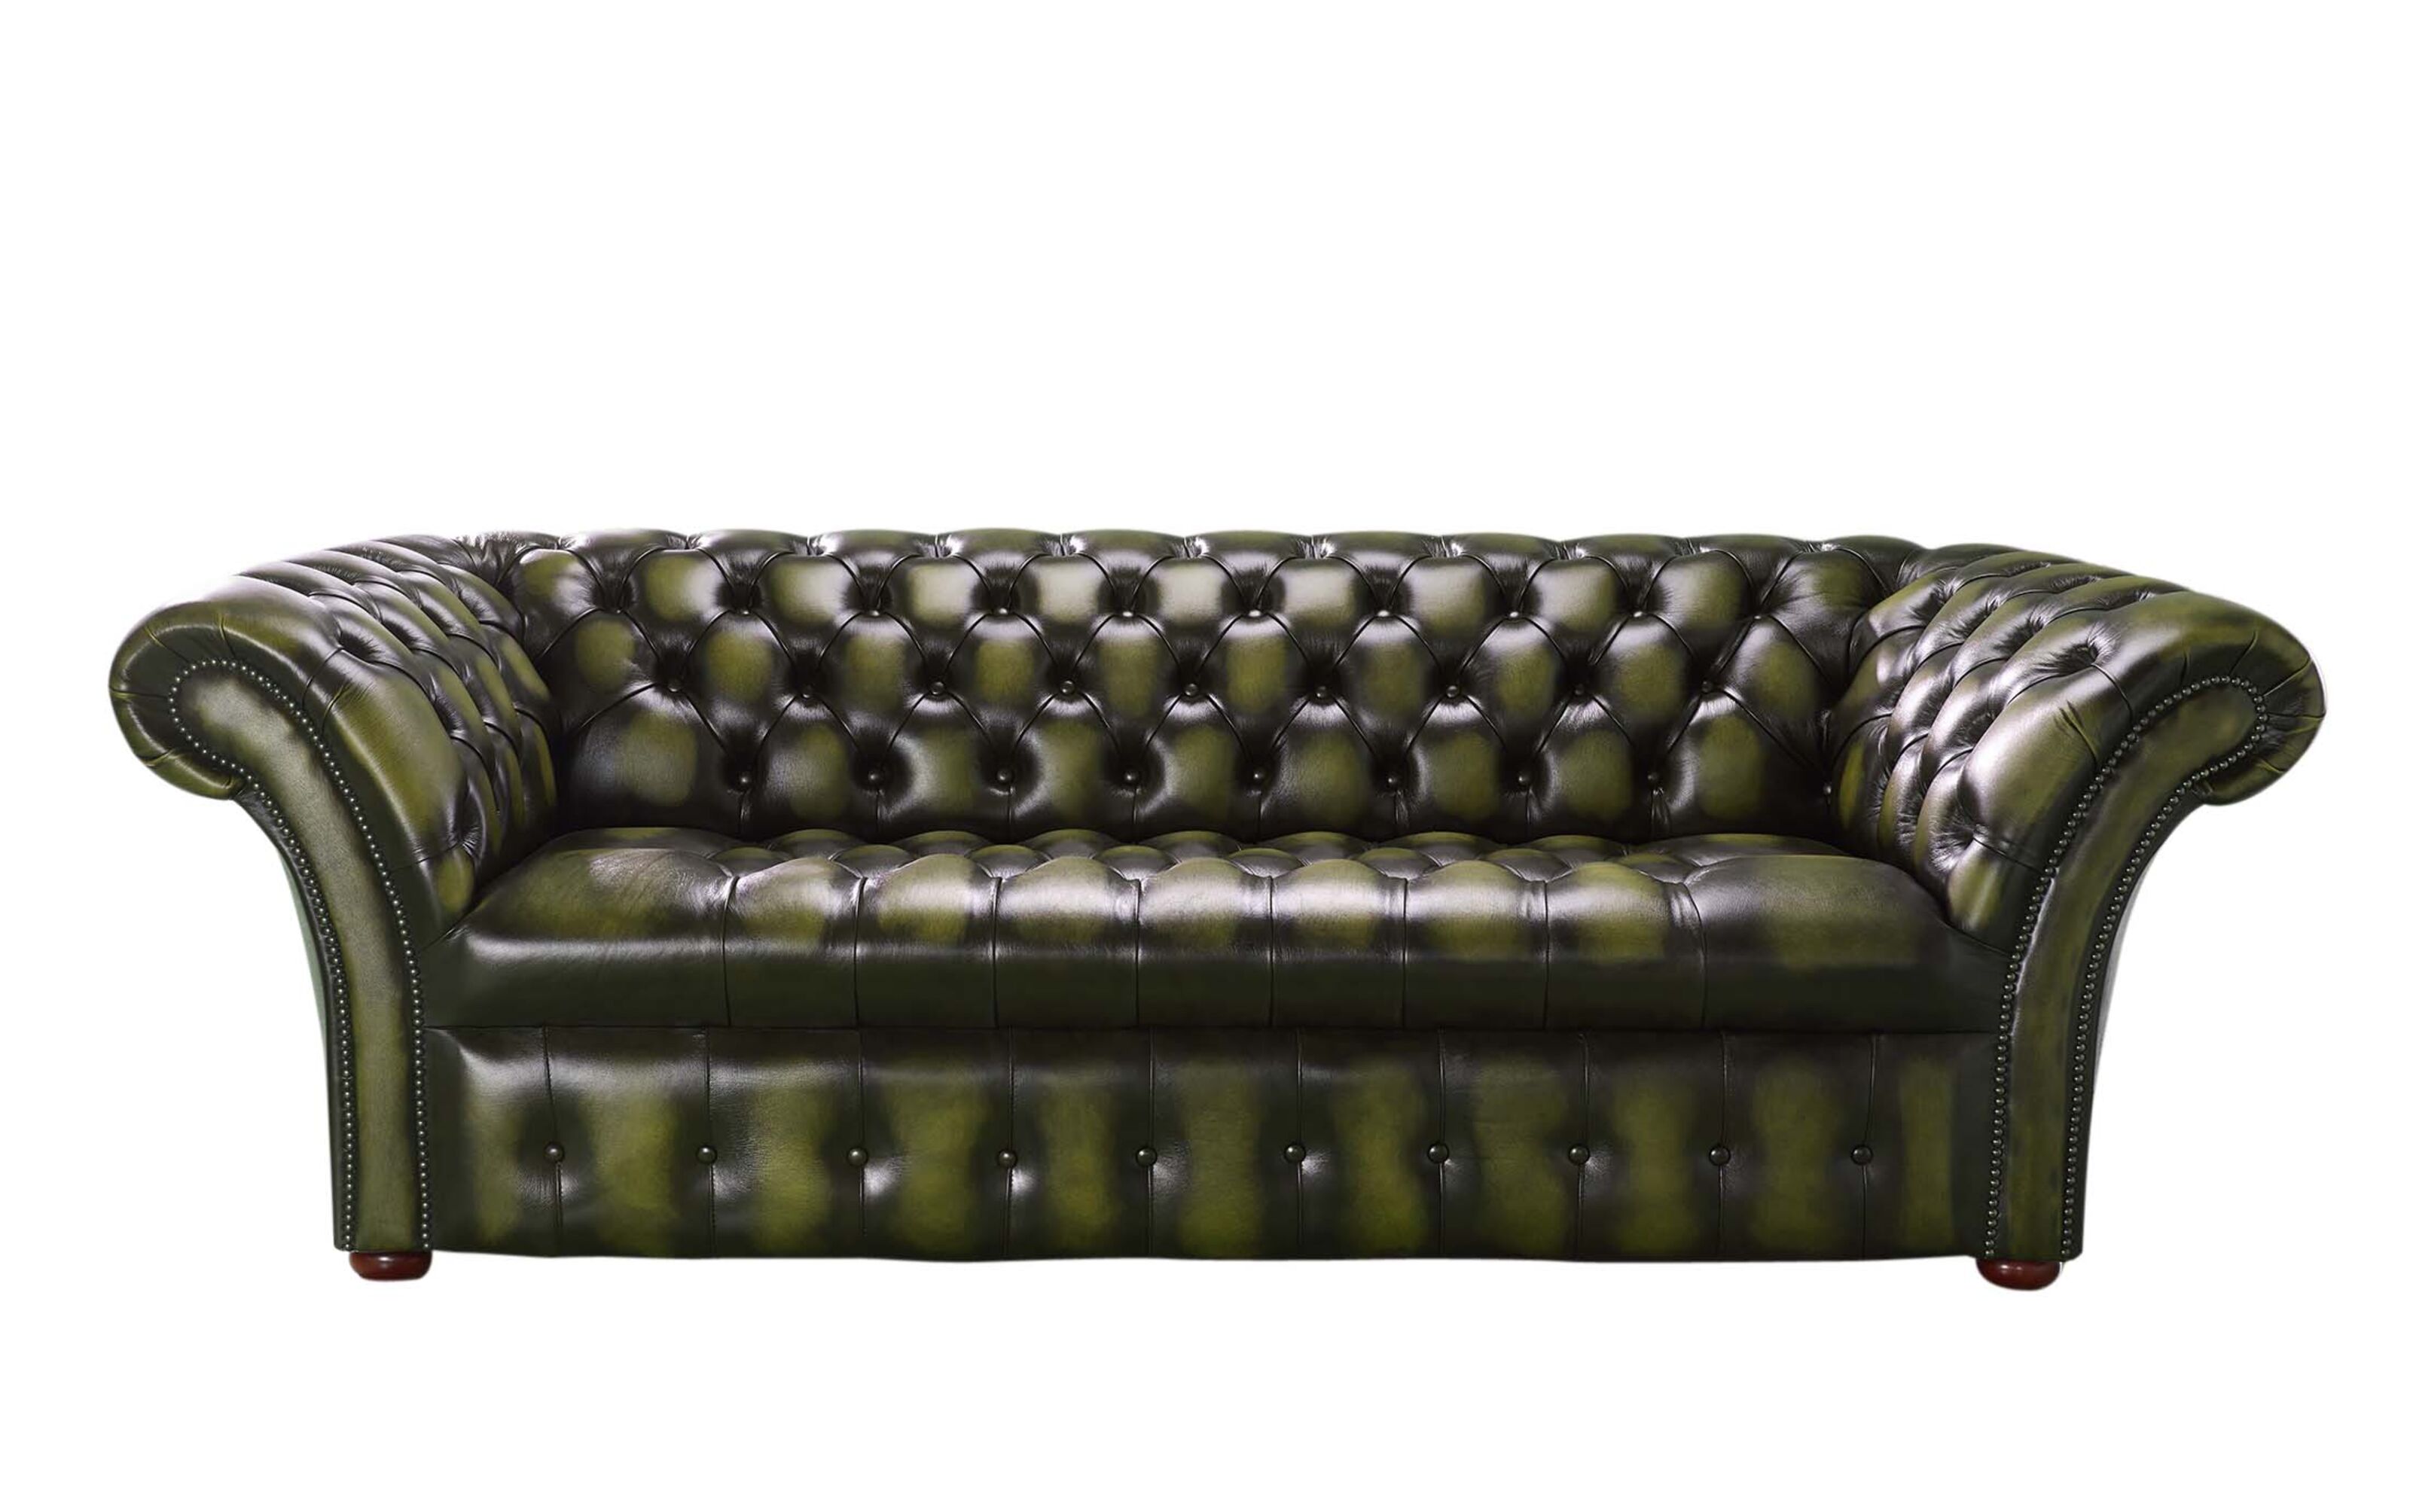 Choosing the Perfect Spot for Your Chesterfield Sofa  %Post Title